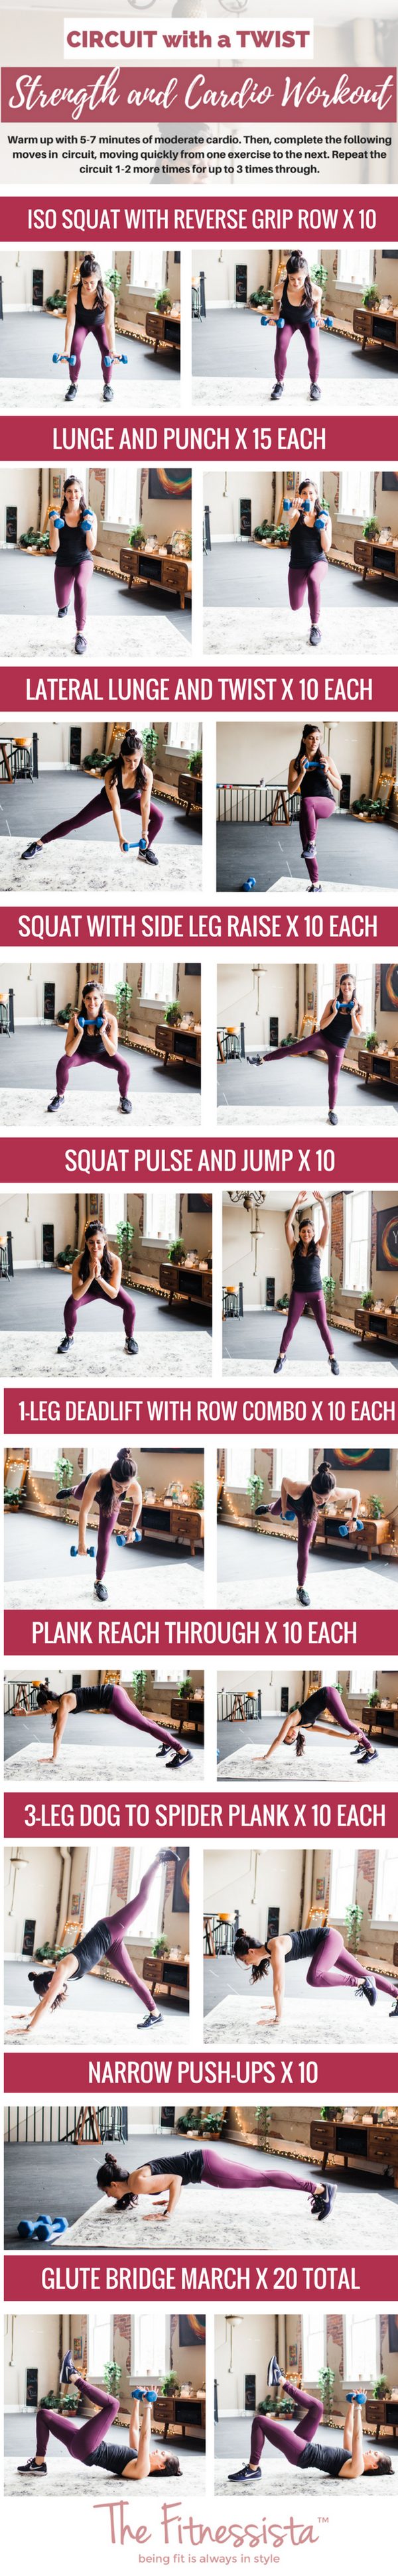 Circuit with a twist! Simple ways to change up your favorite strength training moves. fitnessista.com #circuitworkout #strengthworkout #strengthandcardioworkout